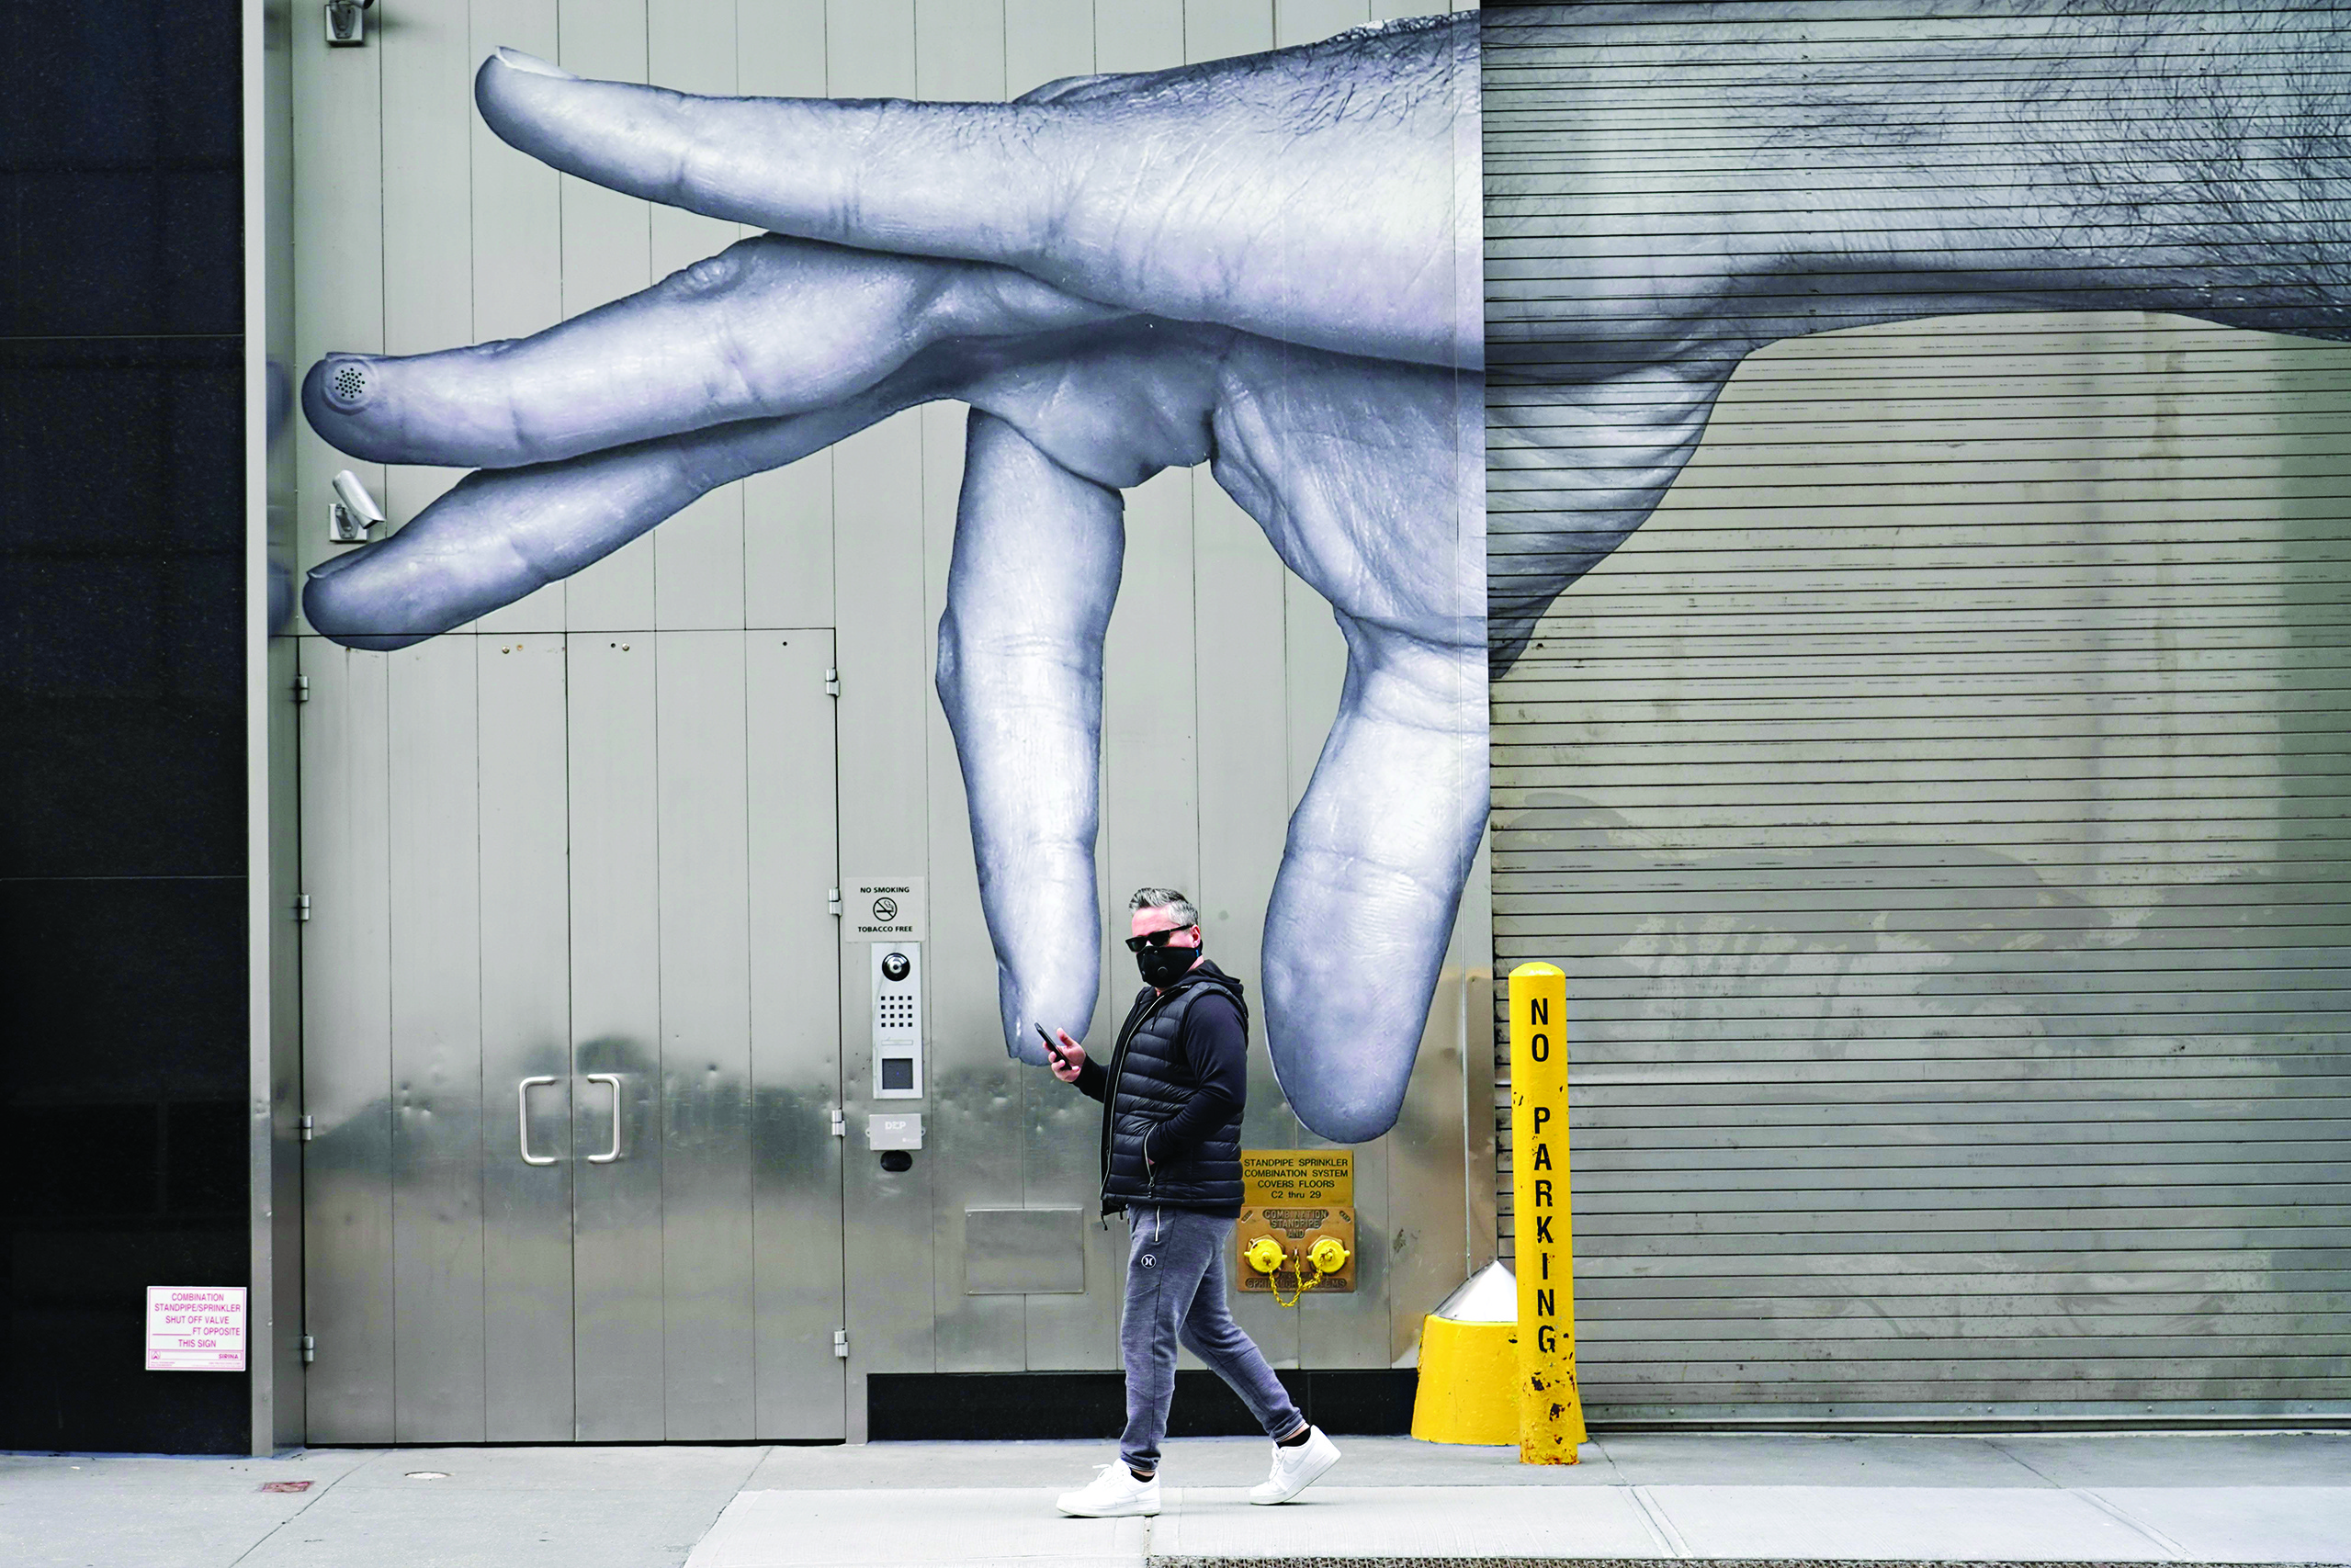 NEW YORK, NEW YORK - APRIL 05: A man wearing a protective mask walks by street art amid the coronavirus pandemic on April 05, 2020 in New York City. COVID-19 has spread to most countries around the world, claiming almost 70,000 lives with infections nearing 1.3 million people.   Cindy Ord/Getty Images/AFPn== FOR NEWSPAPERS, INTERNET, TELCOS &amp; TELEVISION USE ONLY ==